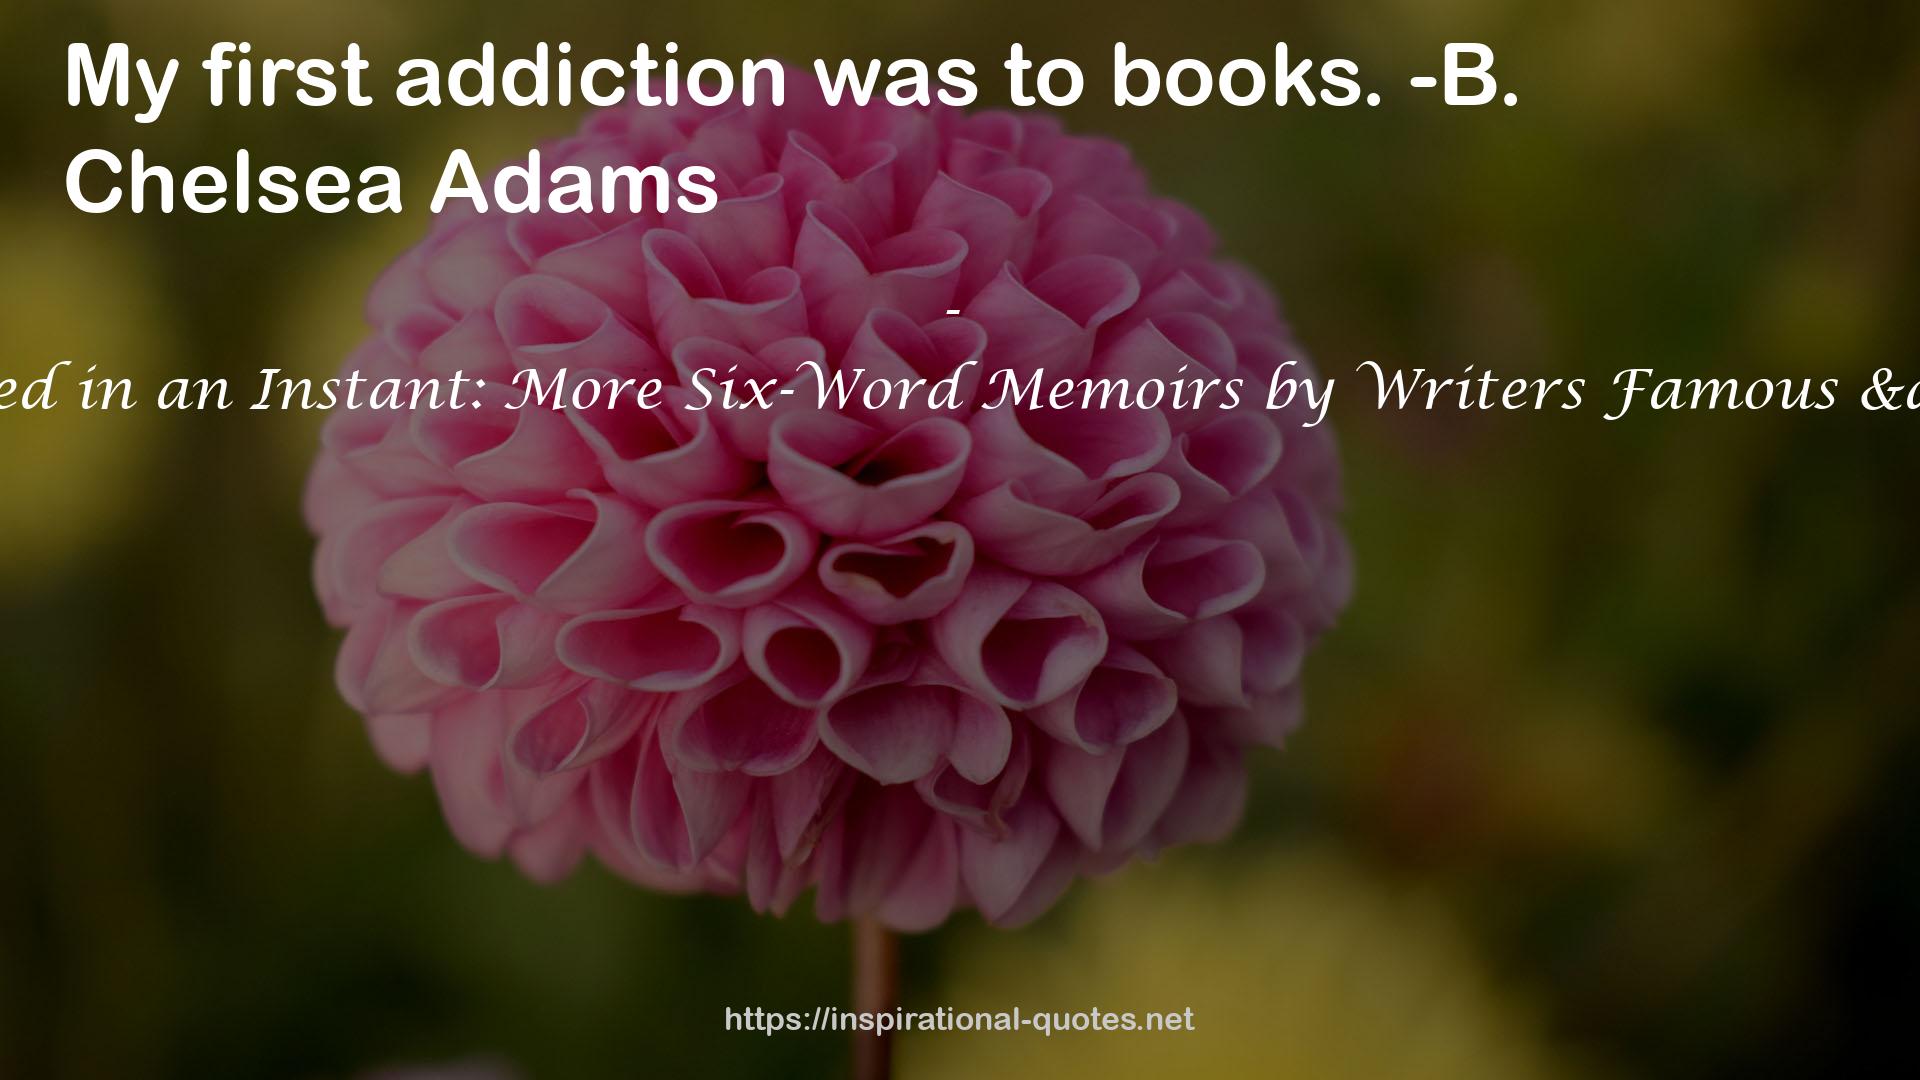 It All Changed in an Instant: More Six-Word Memoirs by Writers Famous & Obscure QUOTES